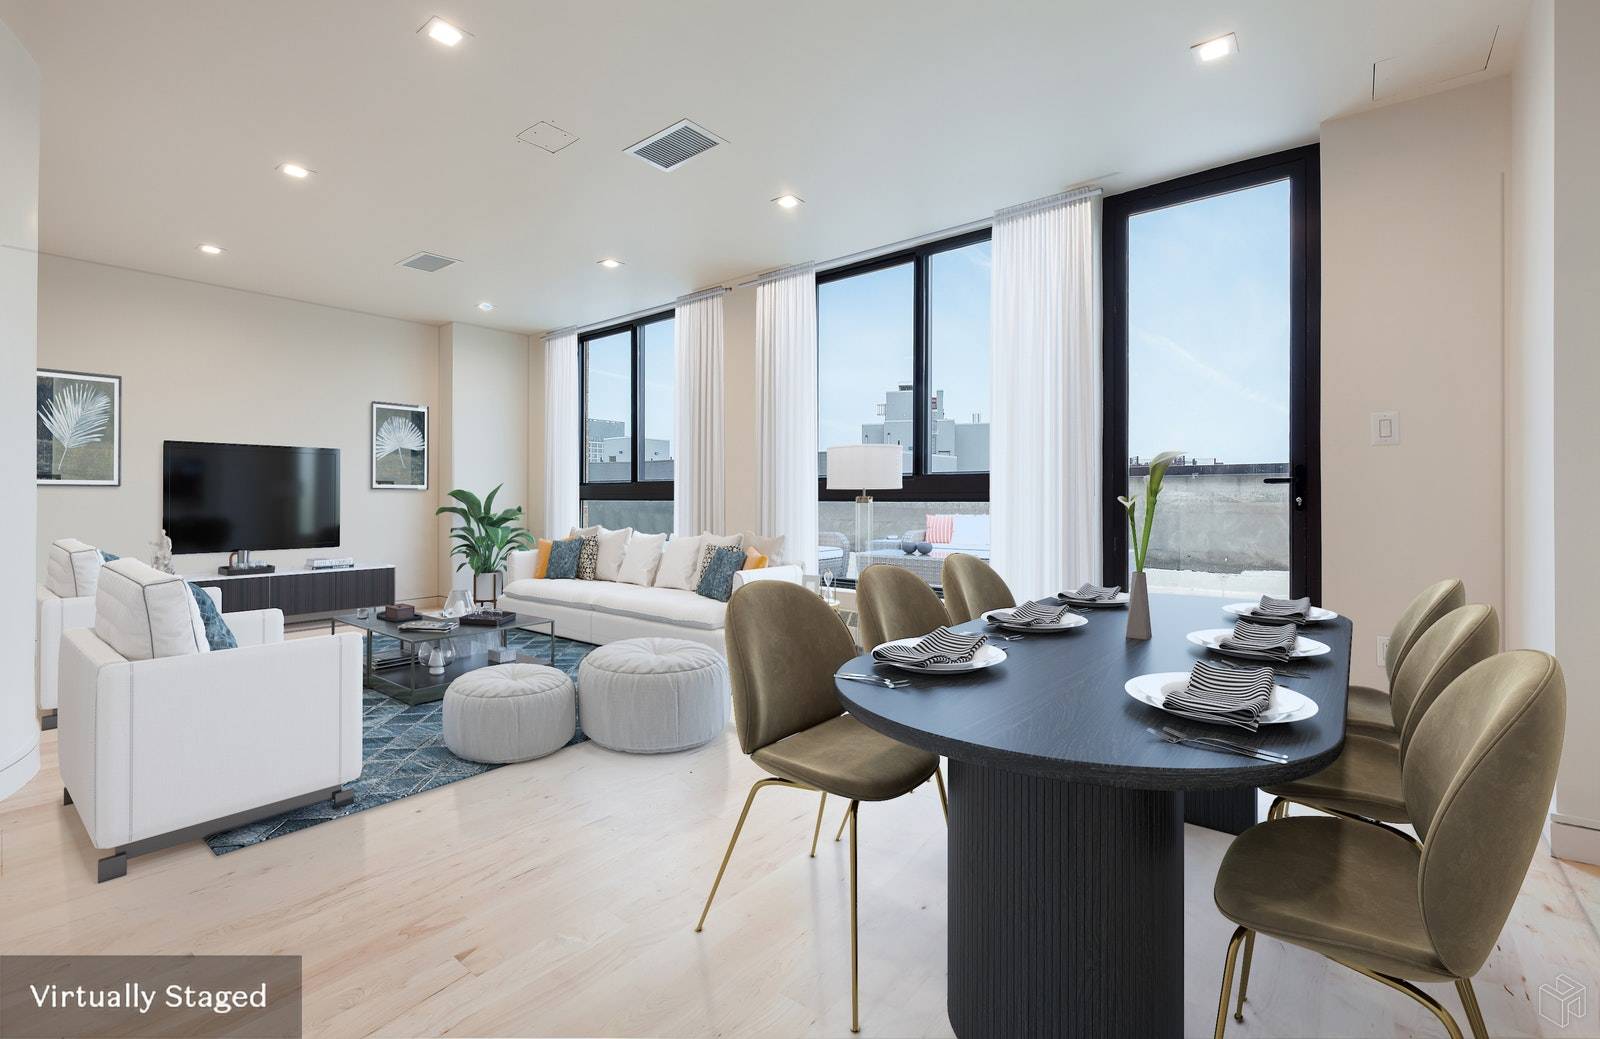 Unit 5B is a 1095 square foot penthouse with private balcony and roof terrace.